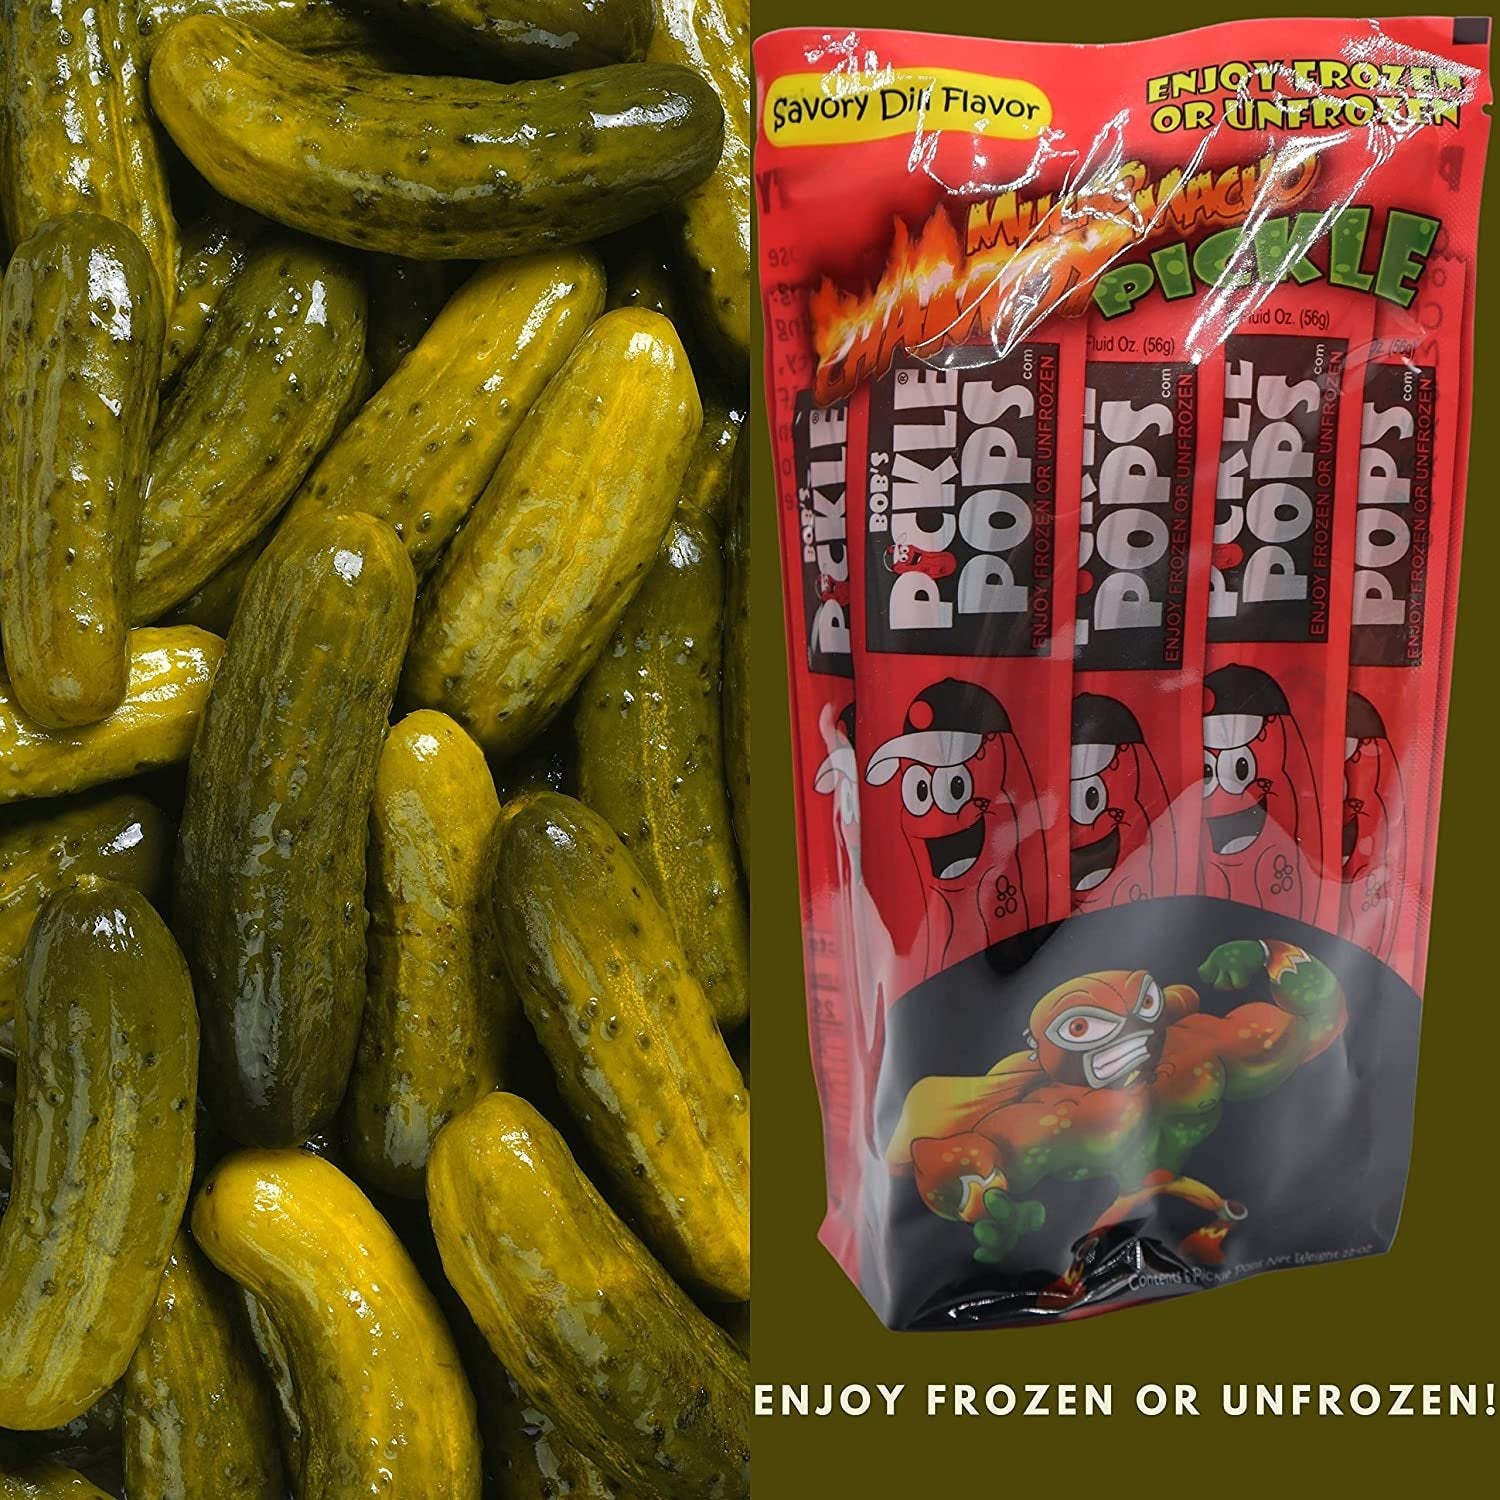 Bobs Pickle Pops Mucho Macho Chamoy - Electrolytes Freezer Pops Pre Workout  Hydration - Athlete Recovery Pickle Juice for Leg Cramps - 7 Pk, 42 Ice  Pops with Multi Purpose Key Chain 